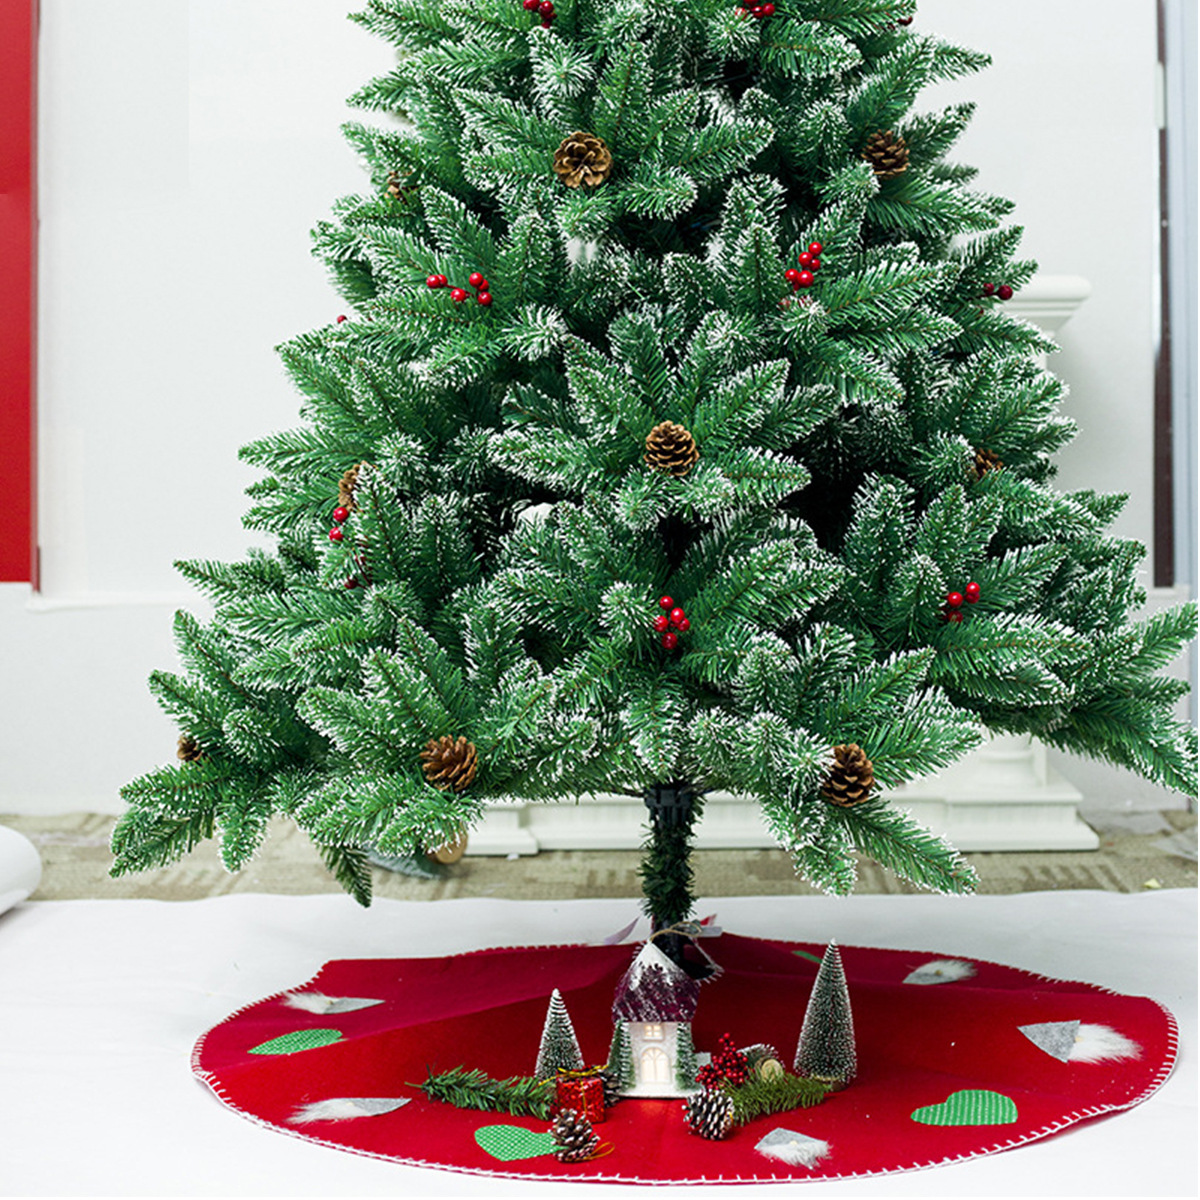 100cm-Red-Christmas-Tree-Skirt-Carpet-Party-Gift-Decor-Pad-Ornaments-Round-Mat-1376090-11